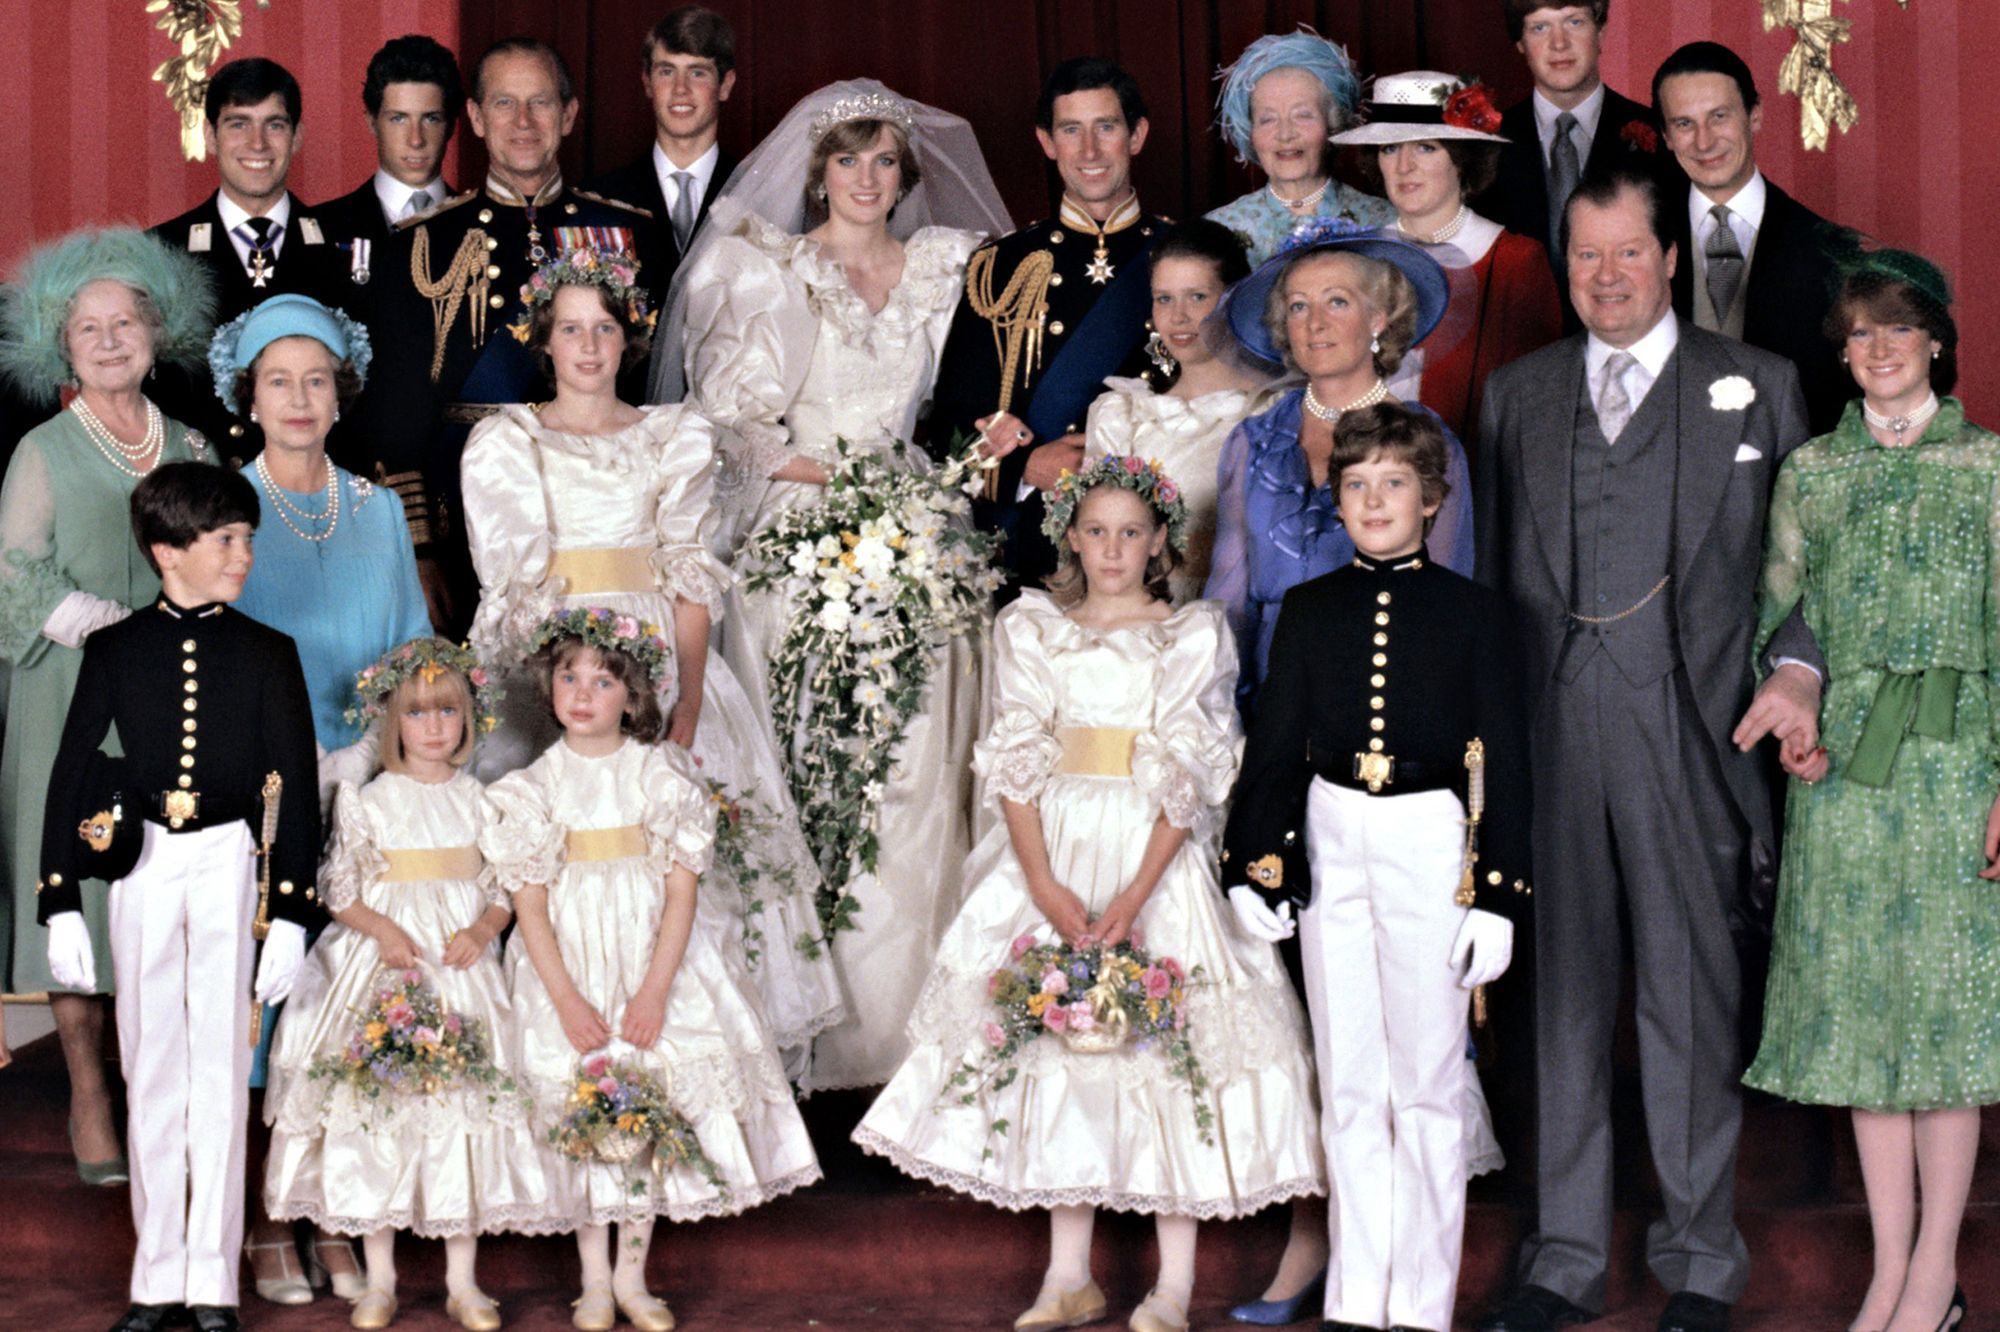  Mariage Lady Diana et prince Charles